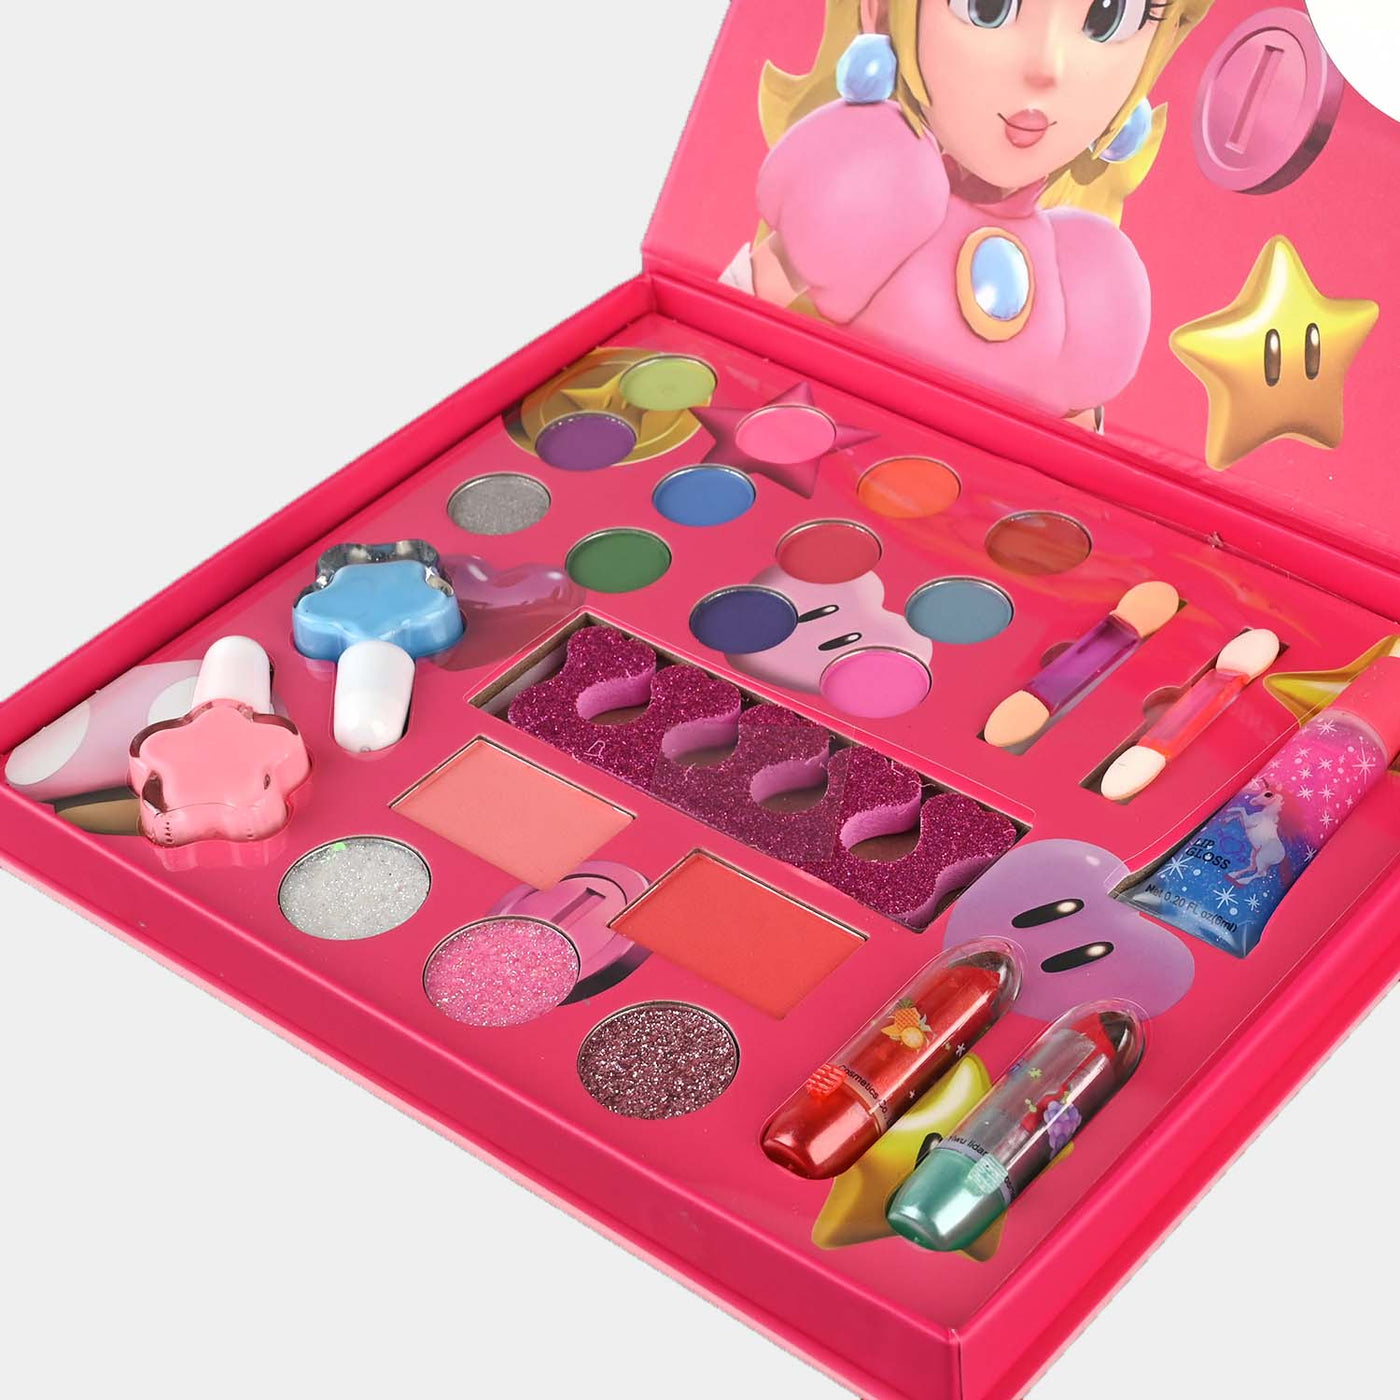 Beauty Collection Makeup Kit For Girls